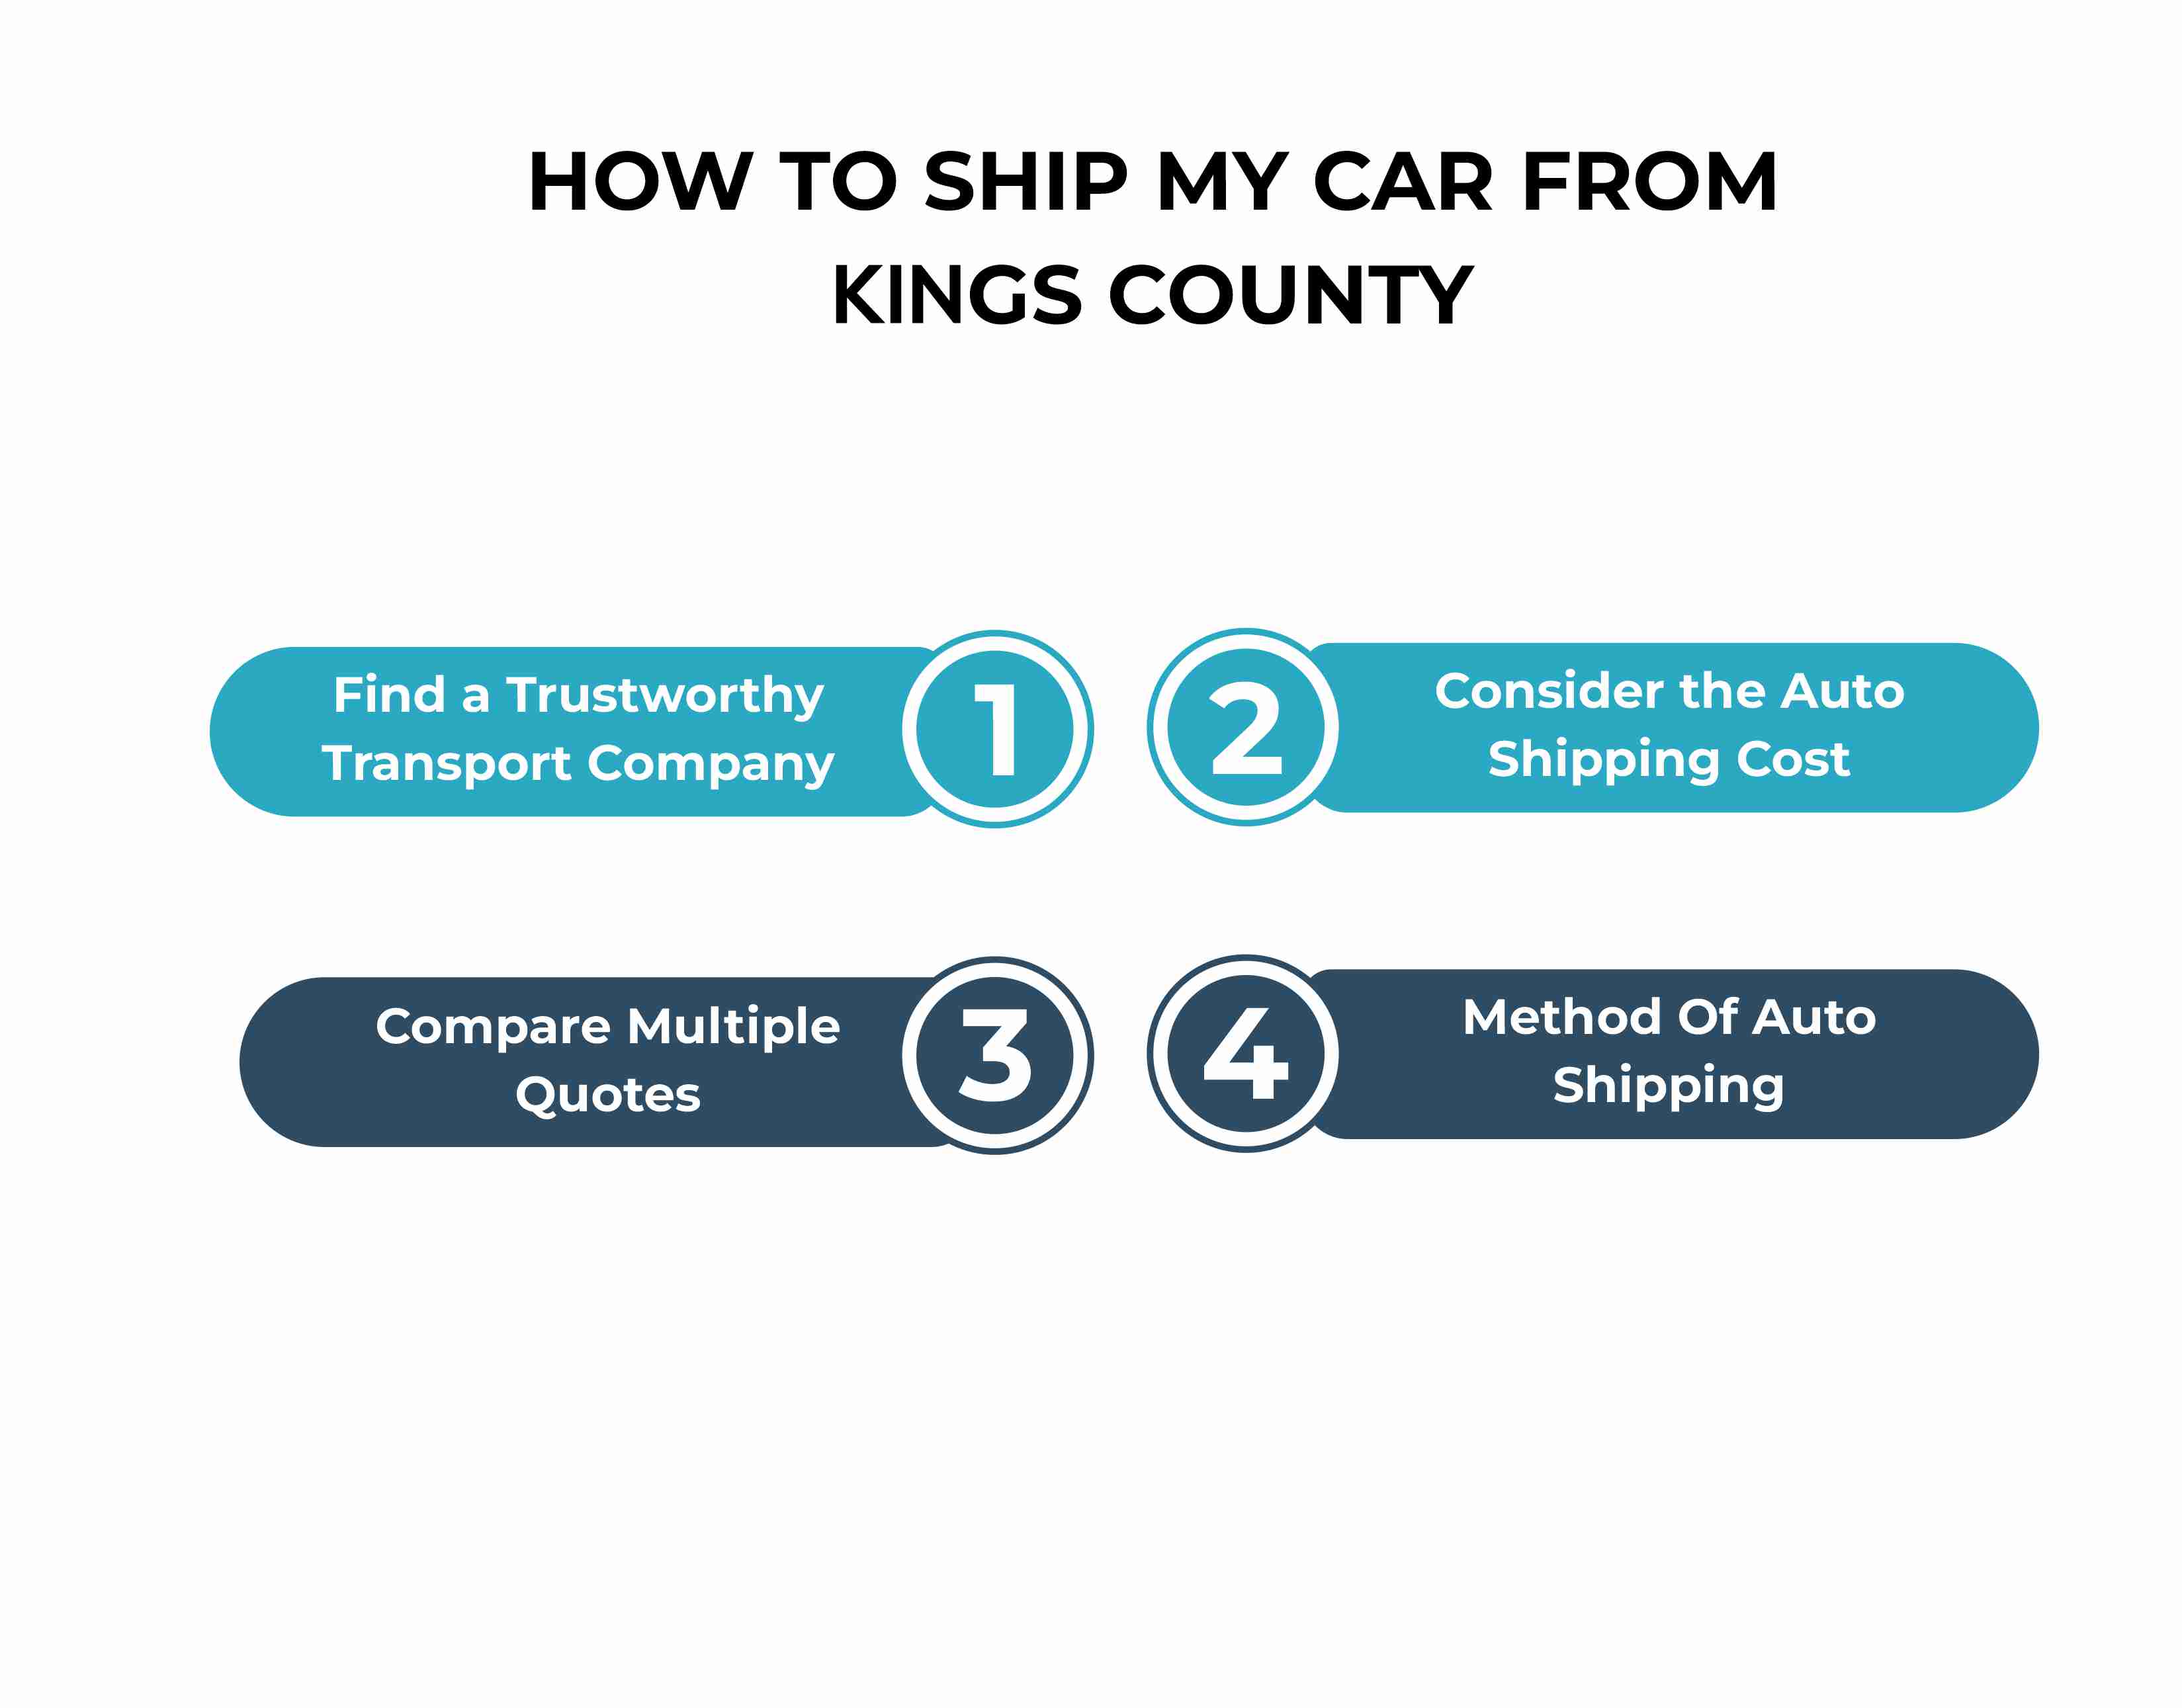 Kings-County-Auto-Transport